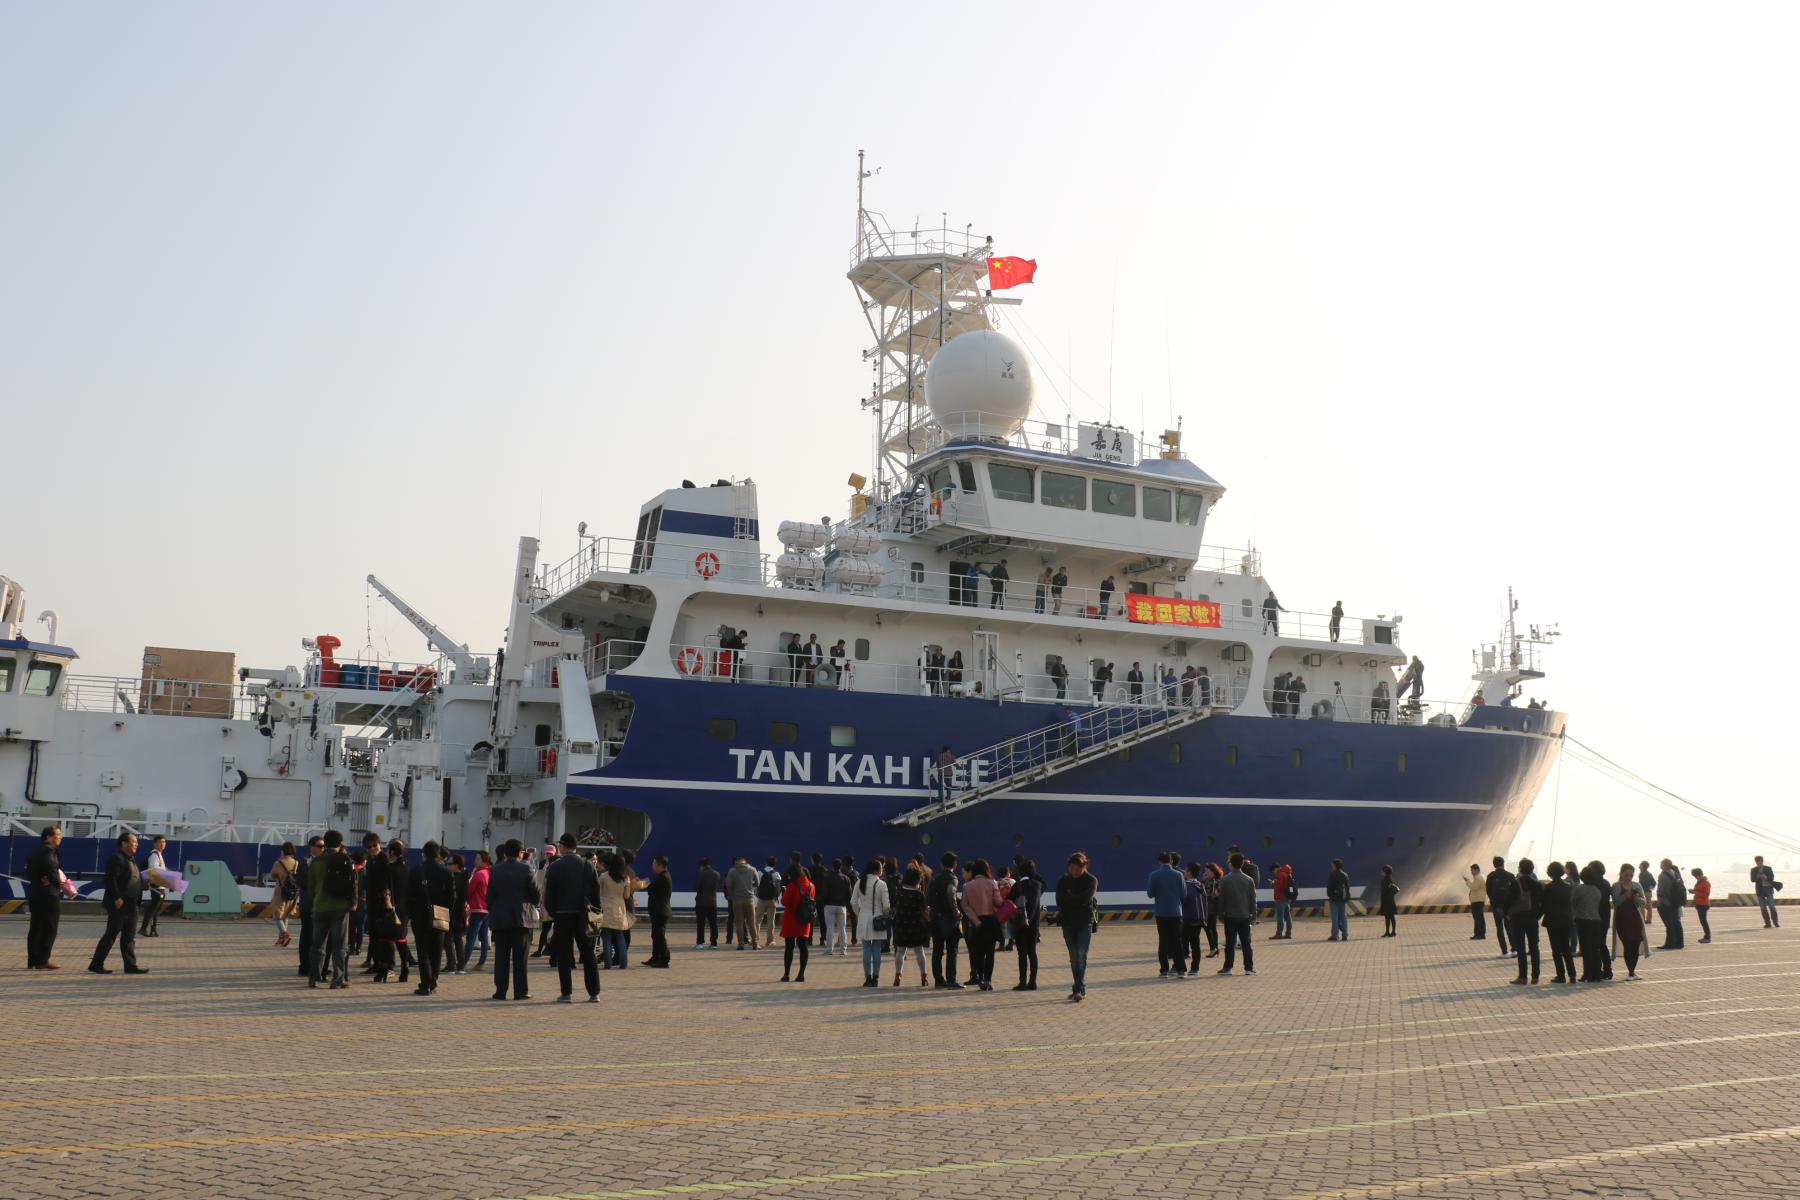 Chinese Research Vessel “Tan Kah Kee” Opens To Public In Malaysia